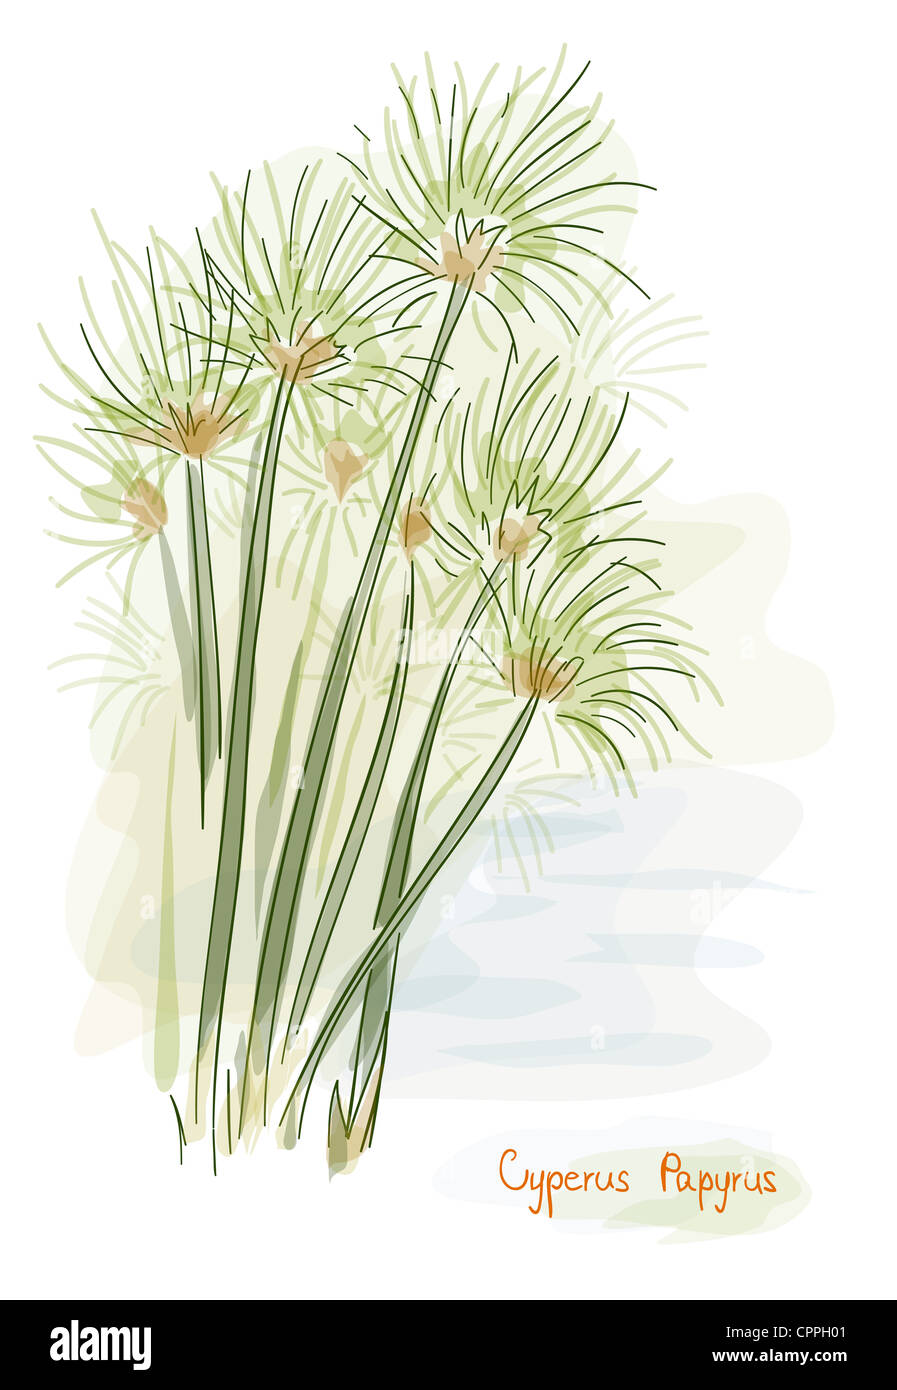 Papyrus plant. (Cyperus Papyrus) Watercolor style. Stock Photo